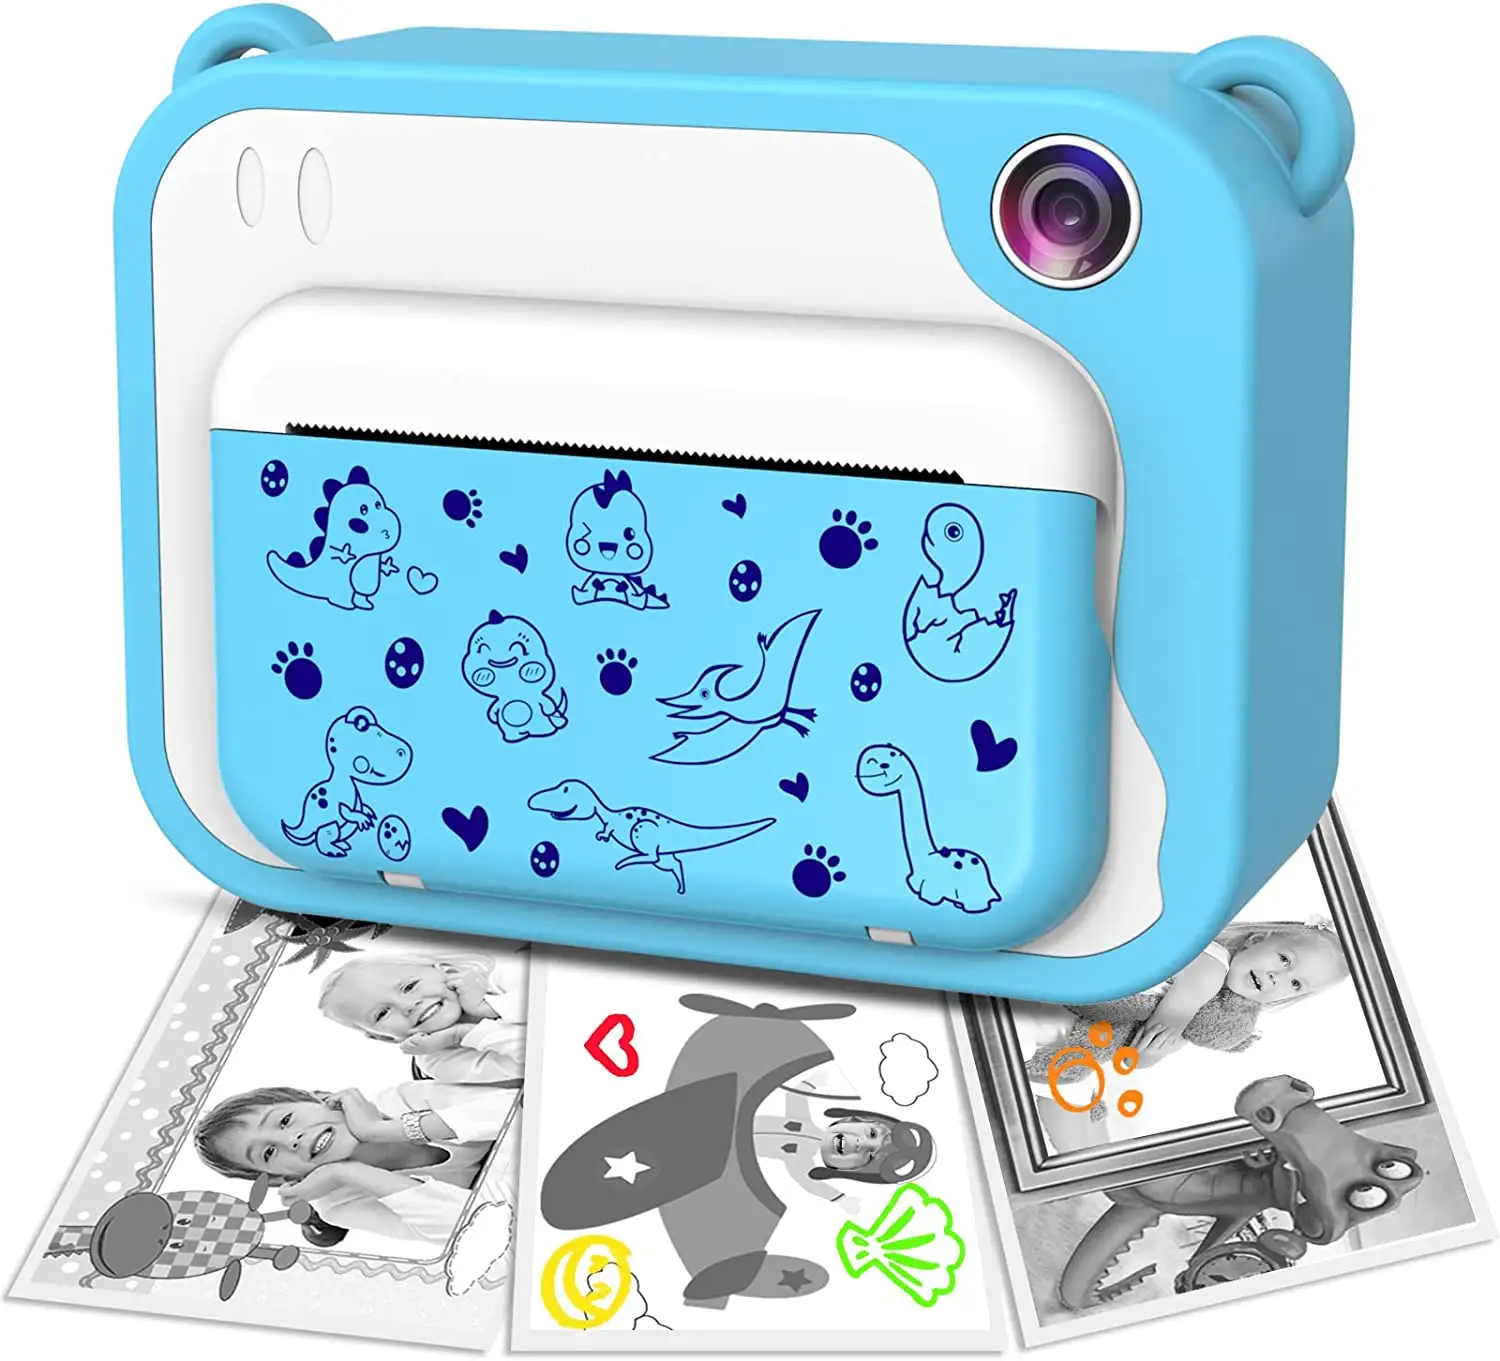 Top Fashion Instant Print Kids Camera Toy Camera ABS Material Mini Digital Camera For Toddler Boy Girl Birthday Gifts